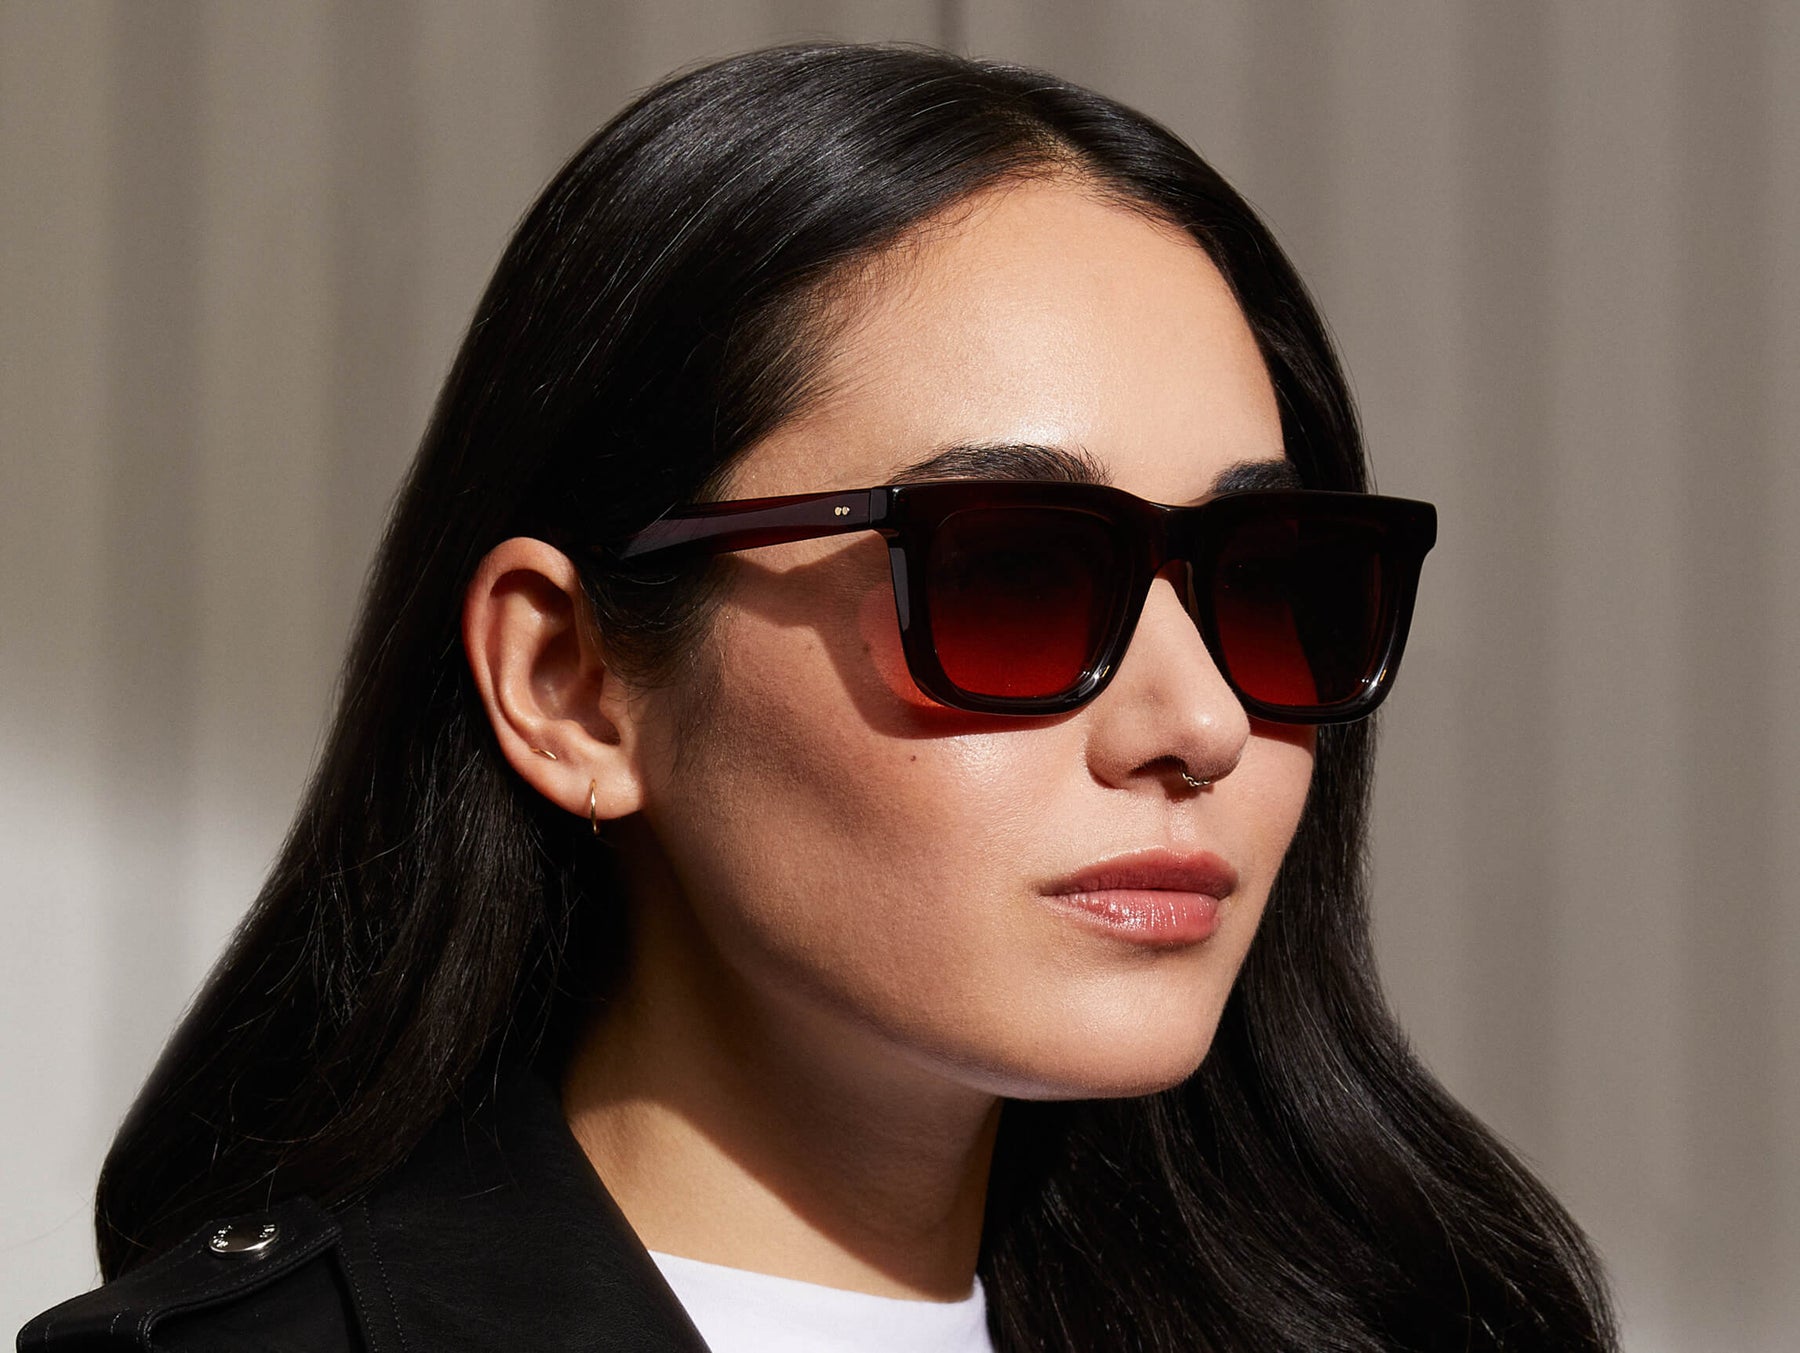 Model is wearing The RIZIK SUN in Burgundy in size 49 with Cabernet Tinted Lenses